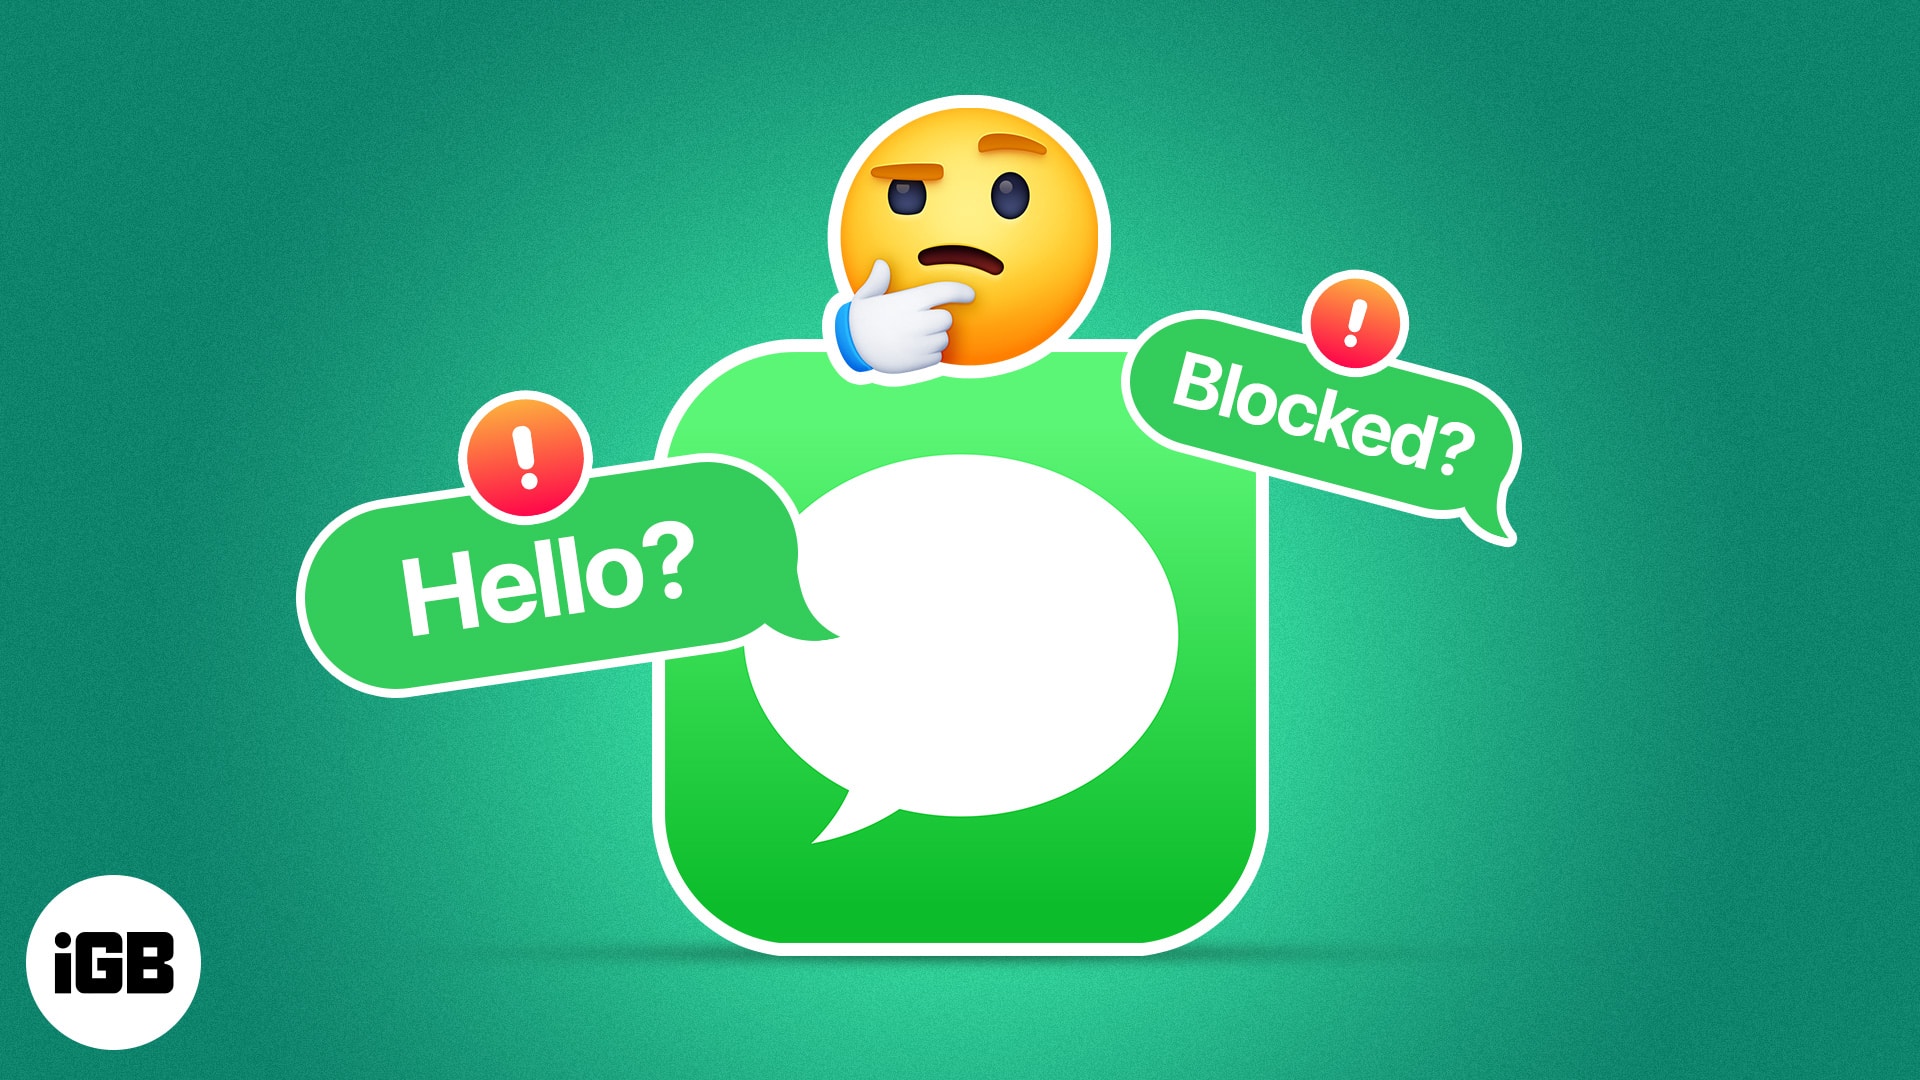 How to know if someone has blocked you on imessage